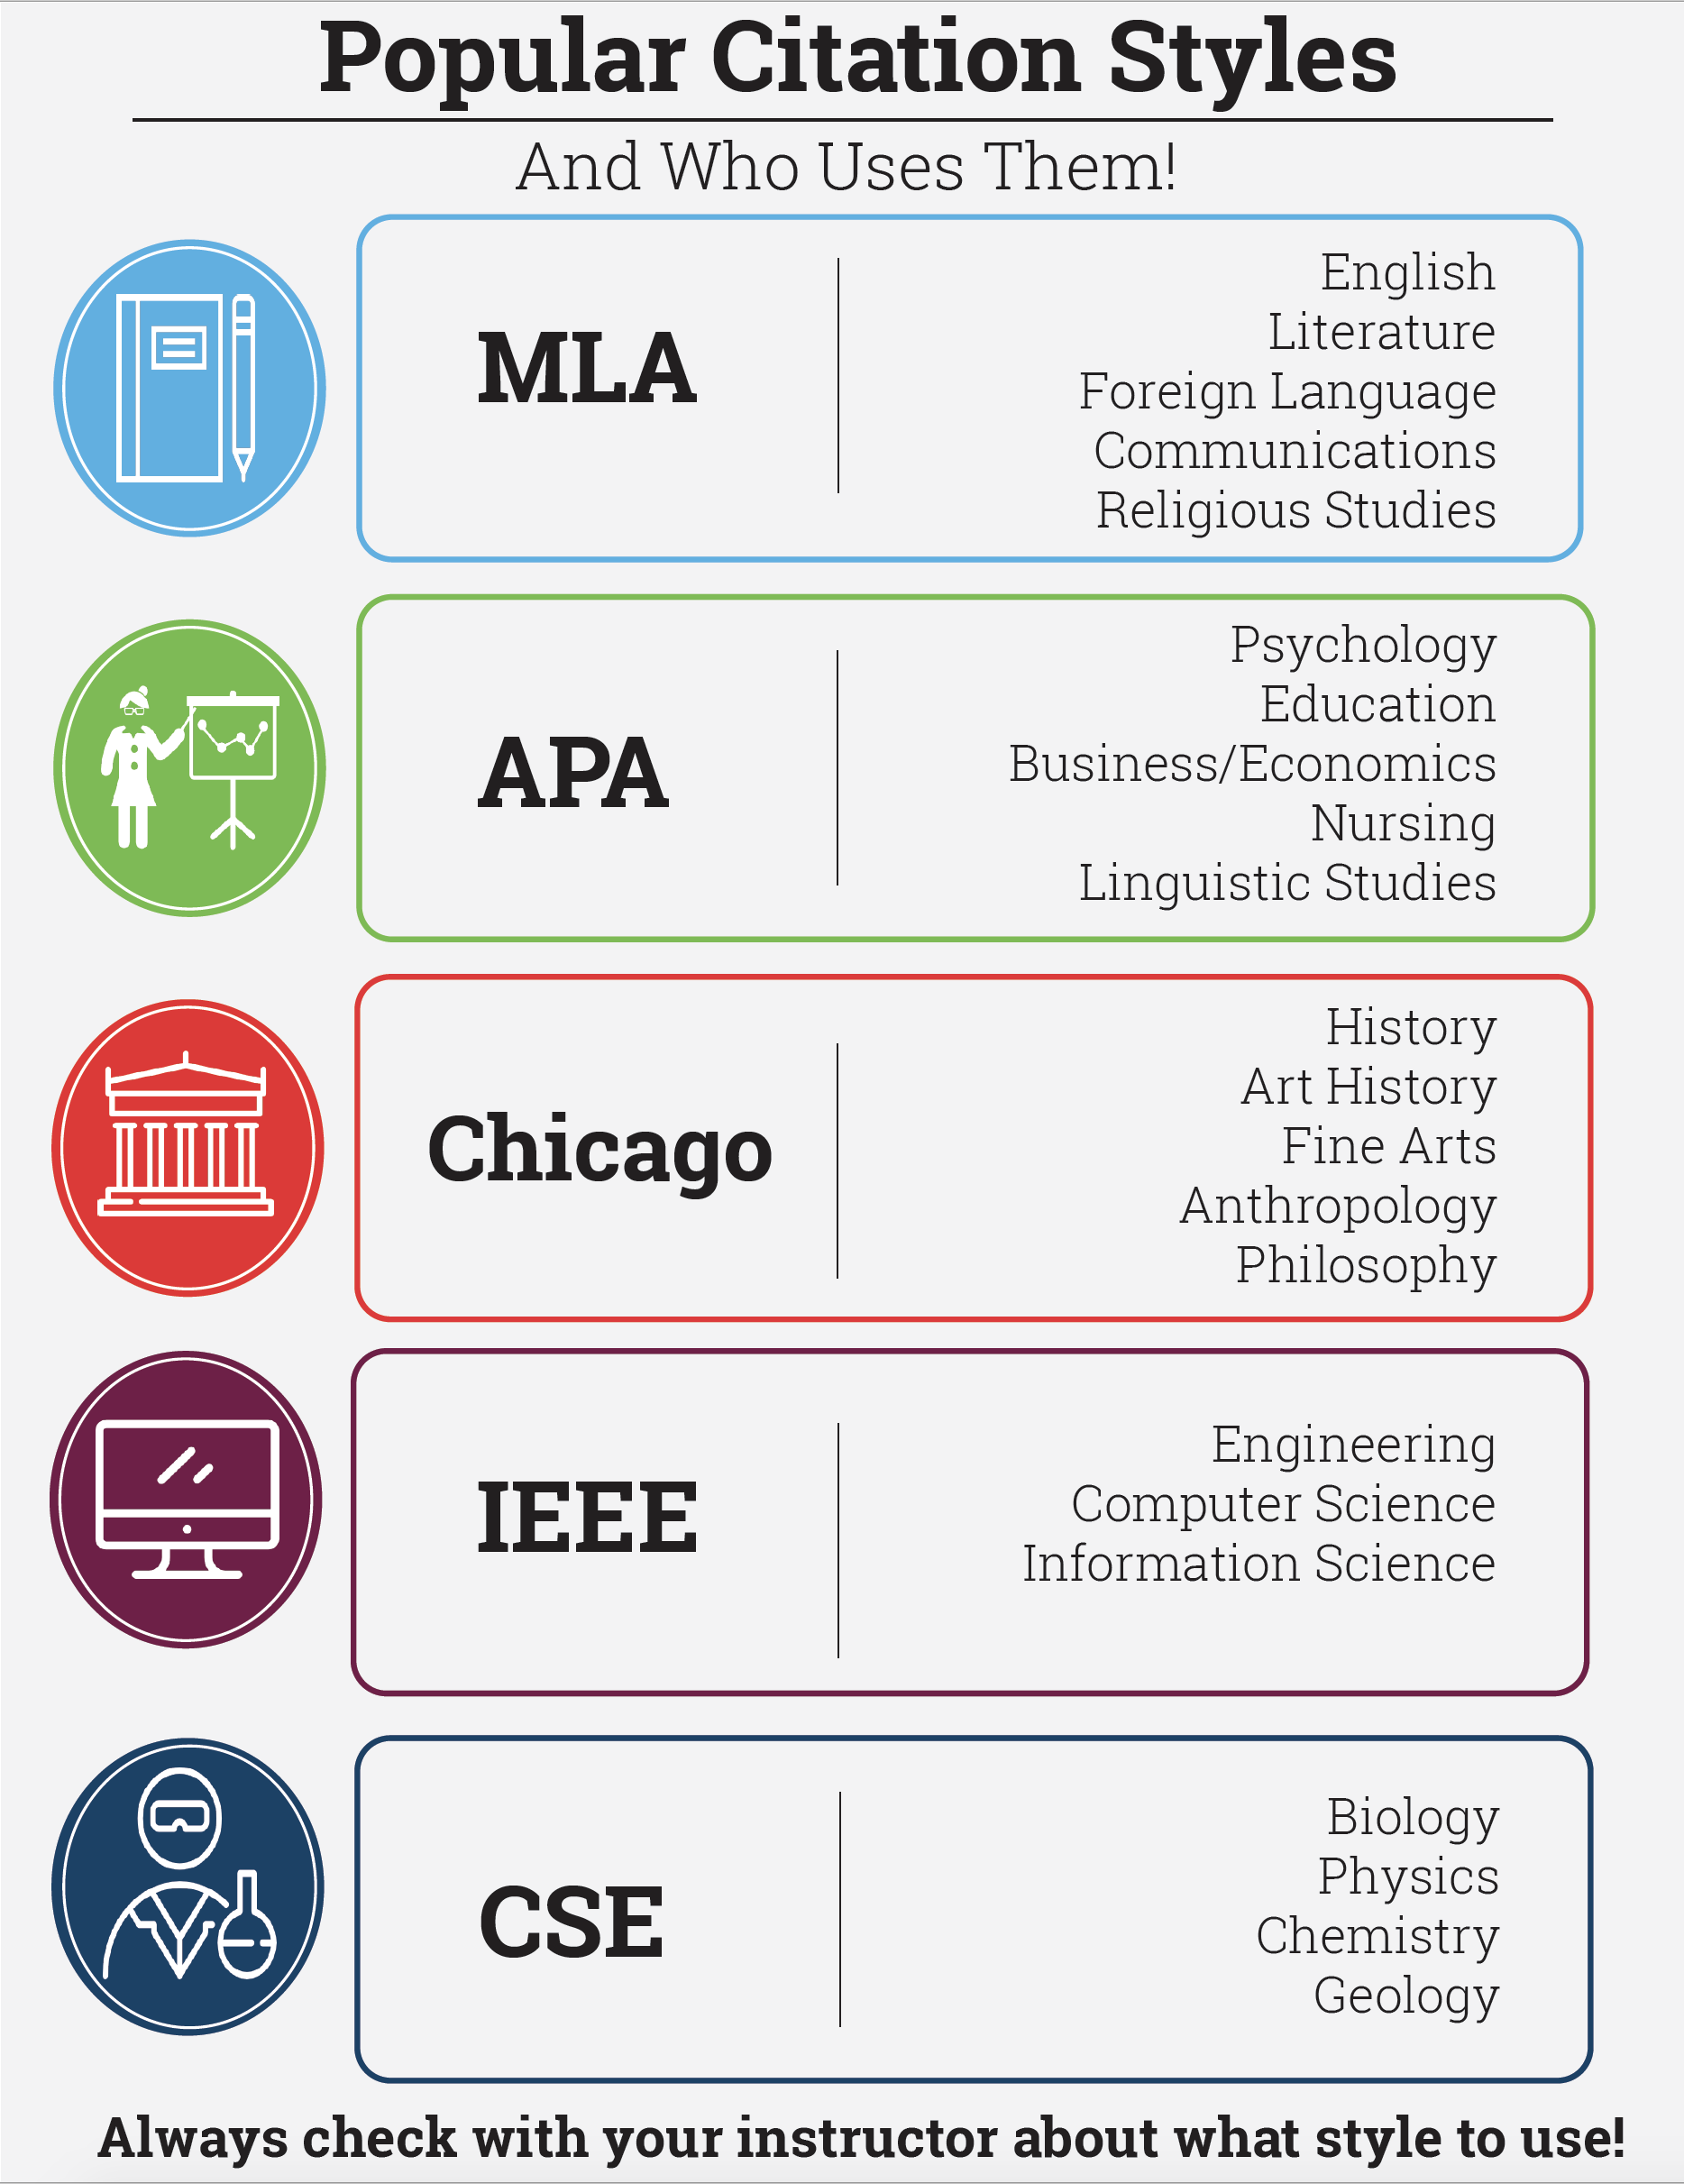 Popular Citation Styles. MLA is used by humanities. APA by social sciences. Chicago Style is used by History, Anthropology and Arts. IEEE is used by Engineers and Computer Scientists. CSE is used by Scientists.